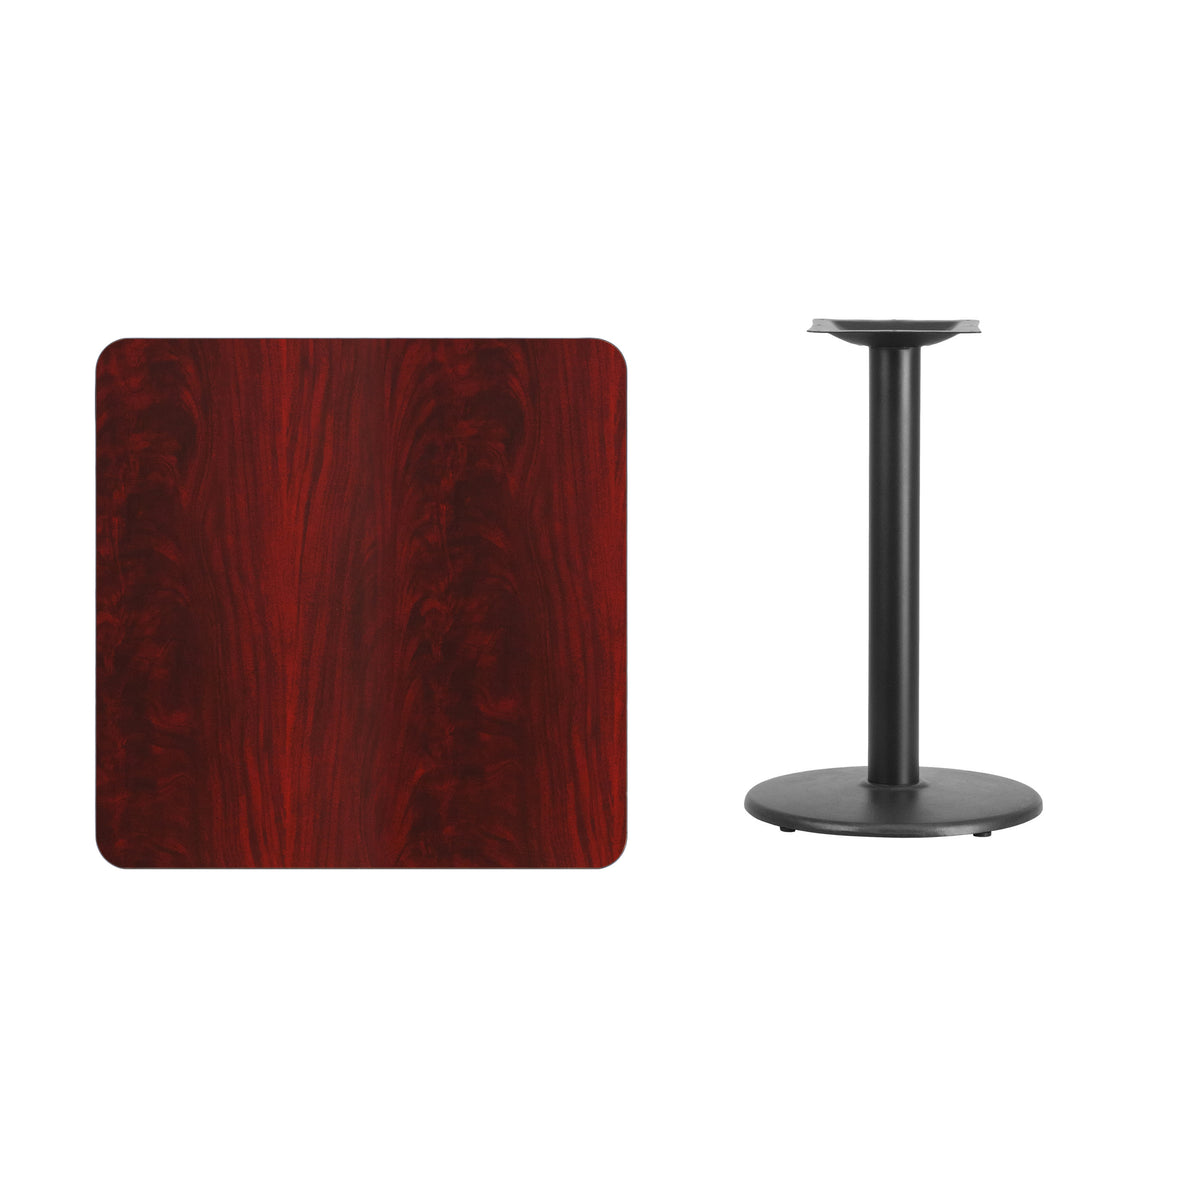 Mahogany |#| 30inch Square Mahogany Laminate Table Top with 18inch Round Table Height Base